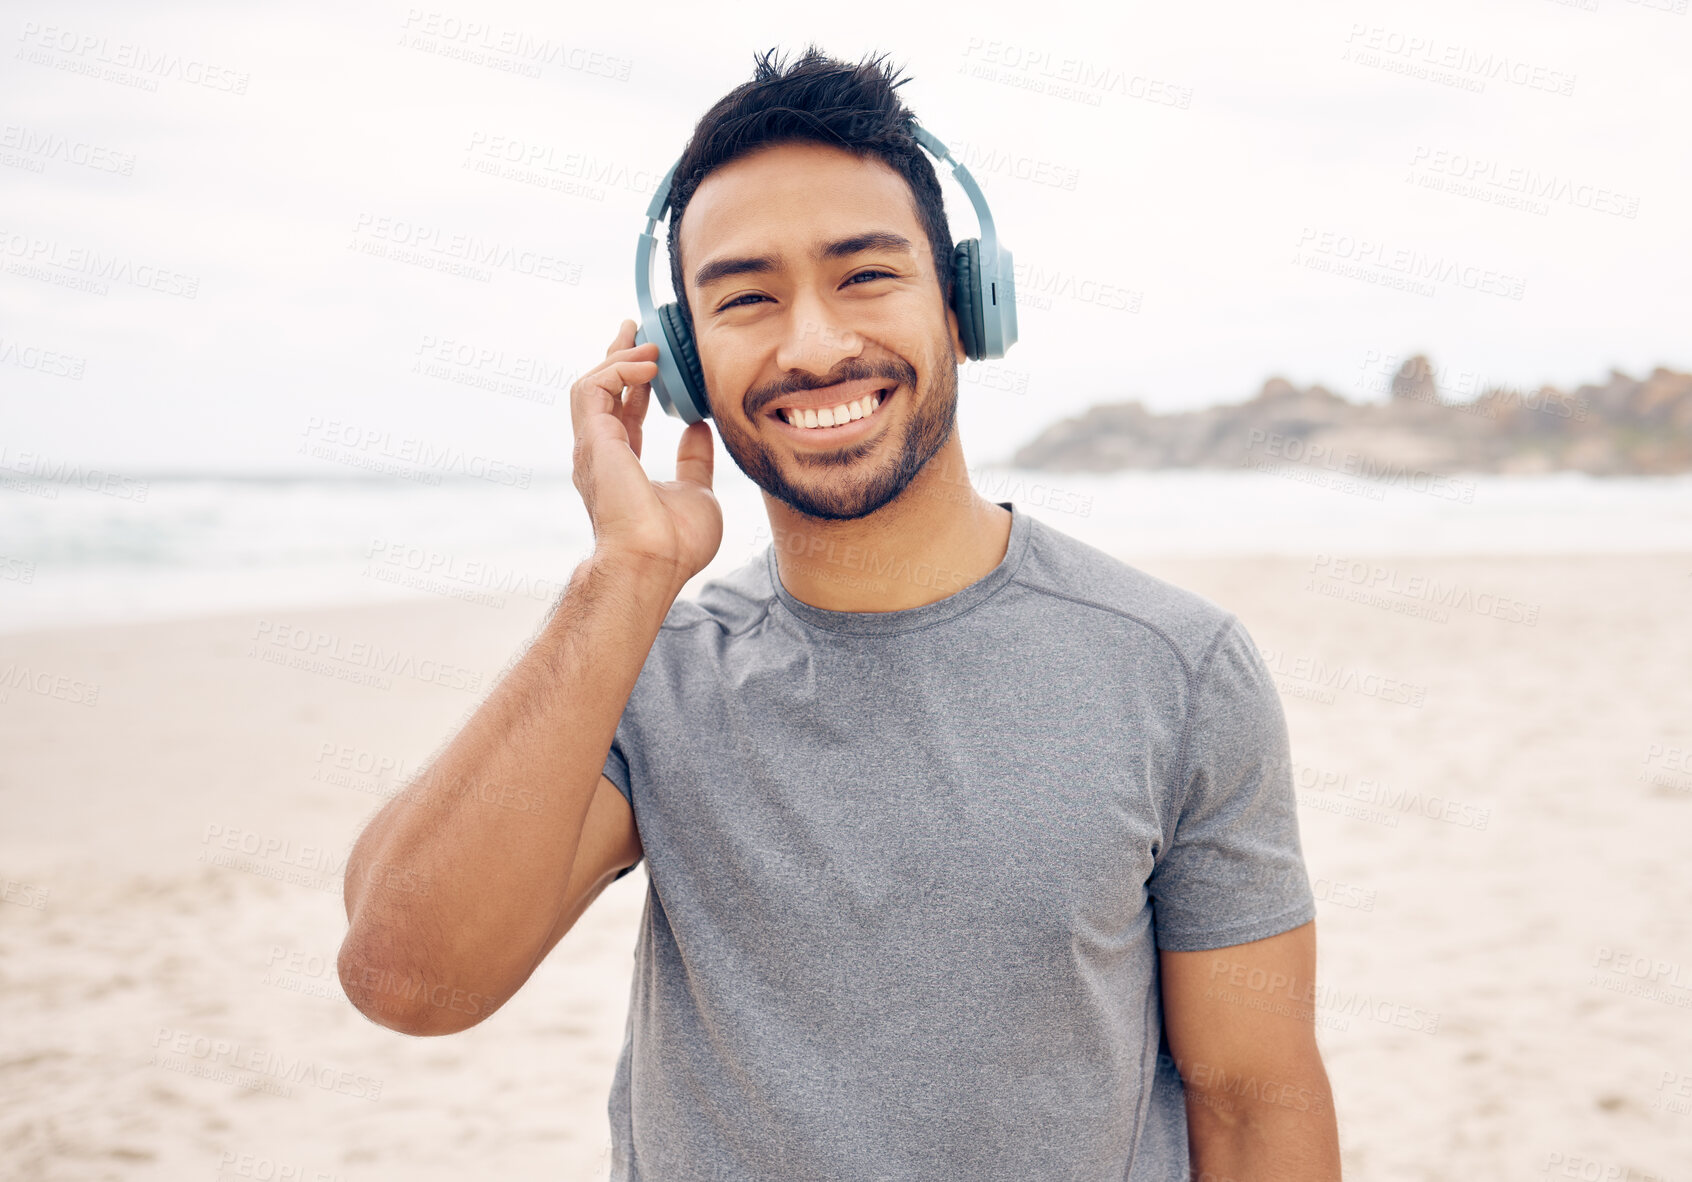 Buy stock photo Smile, headphones and portrait of man on the beach running for race, marathon or competition training. Happy, fitness and young male athlete listen to music, radio or playlist for exercise by ocean.